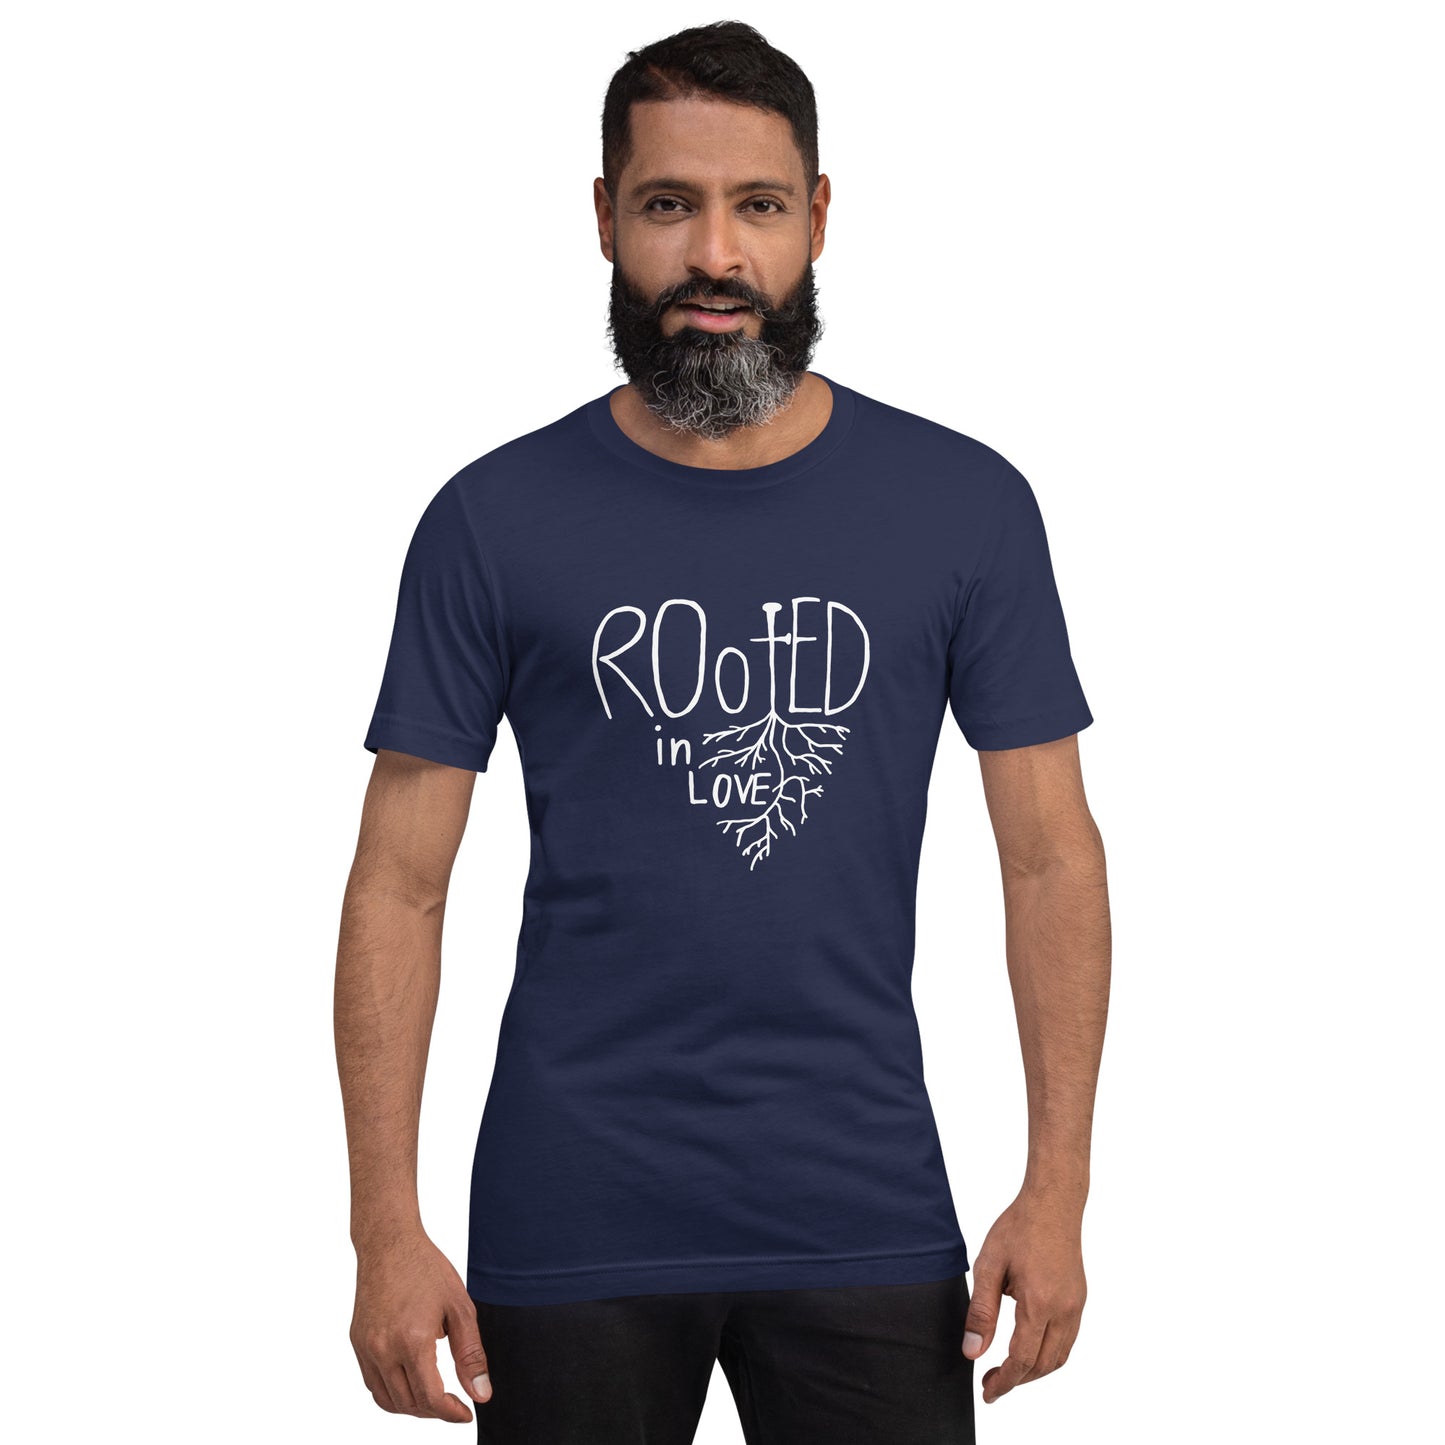 Rooted in Love - T-Shirt - Unisex